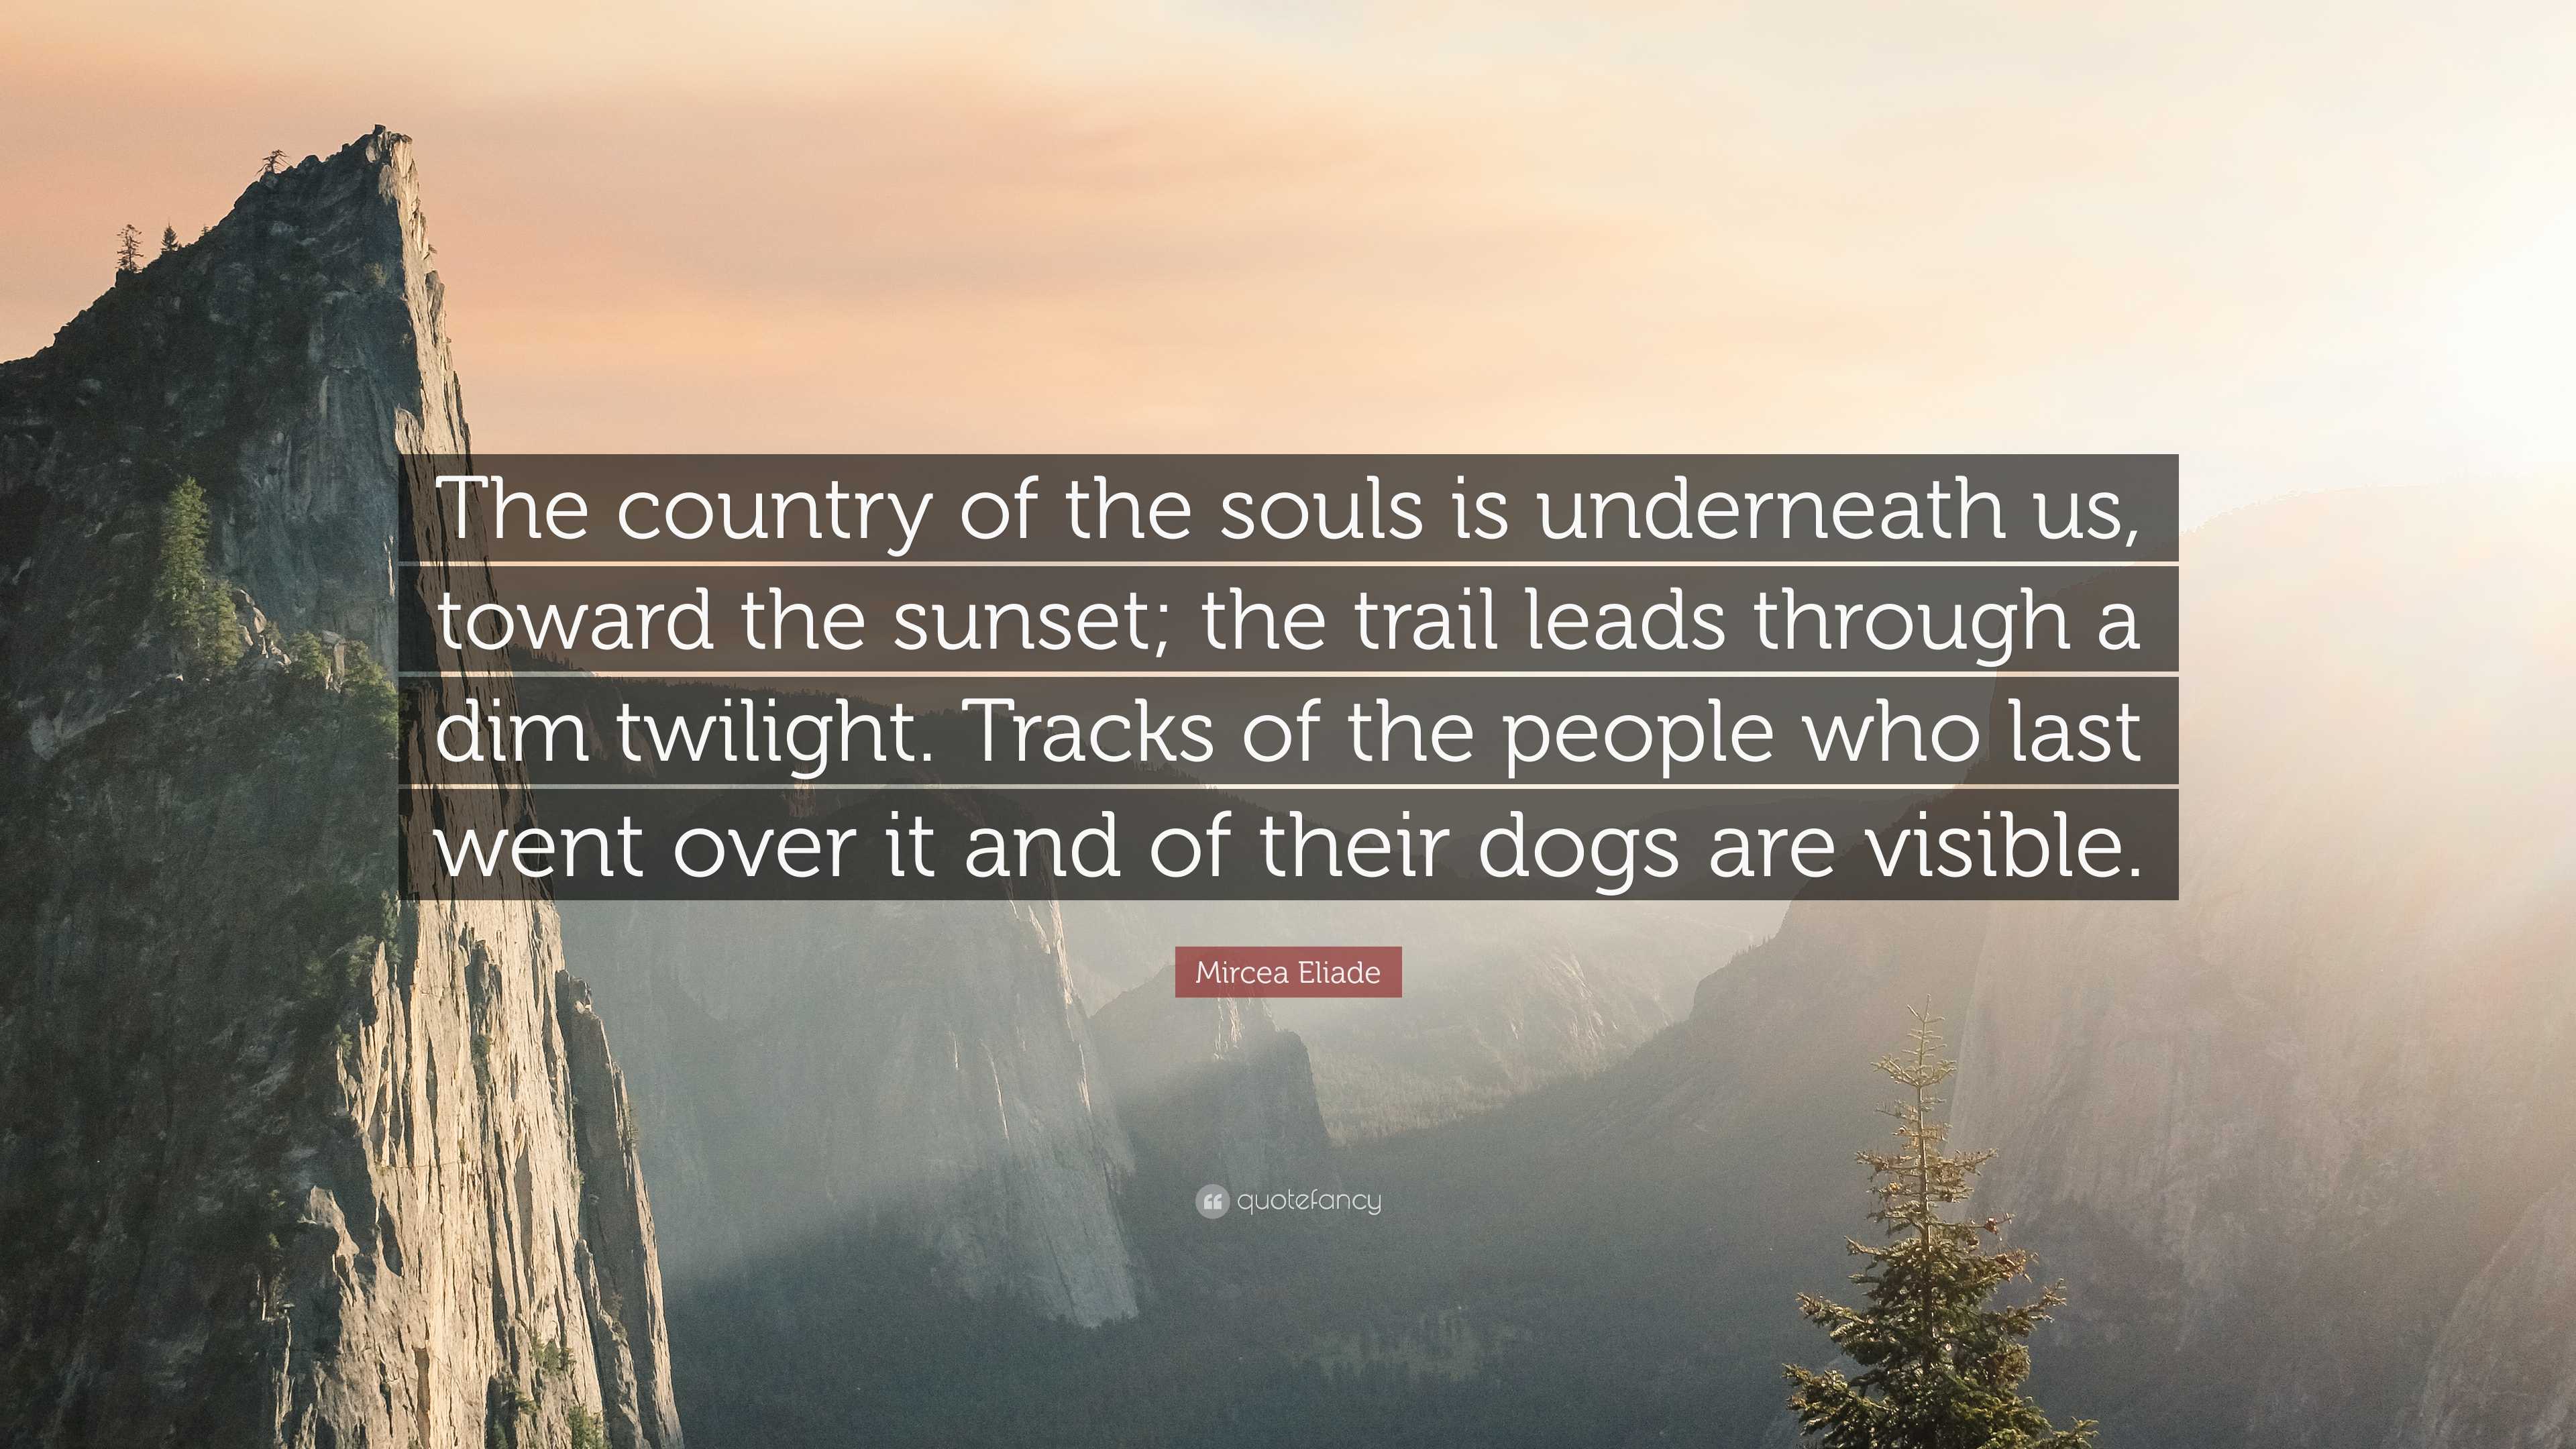 Mircea Eliade Quote: “The country of the souls is underneath us